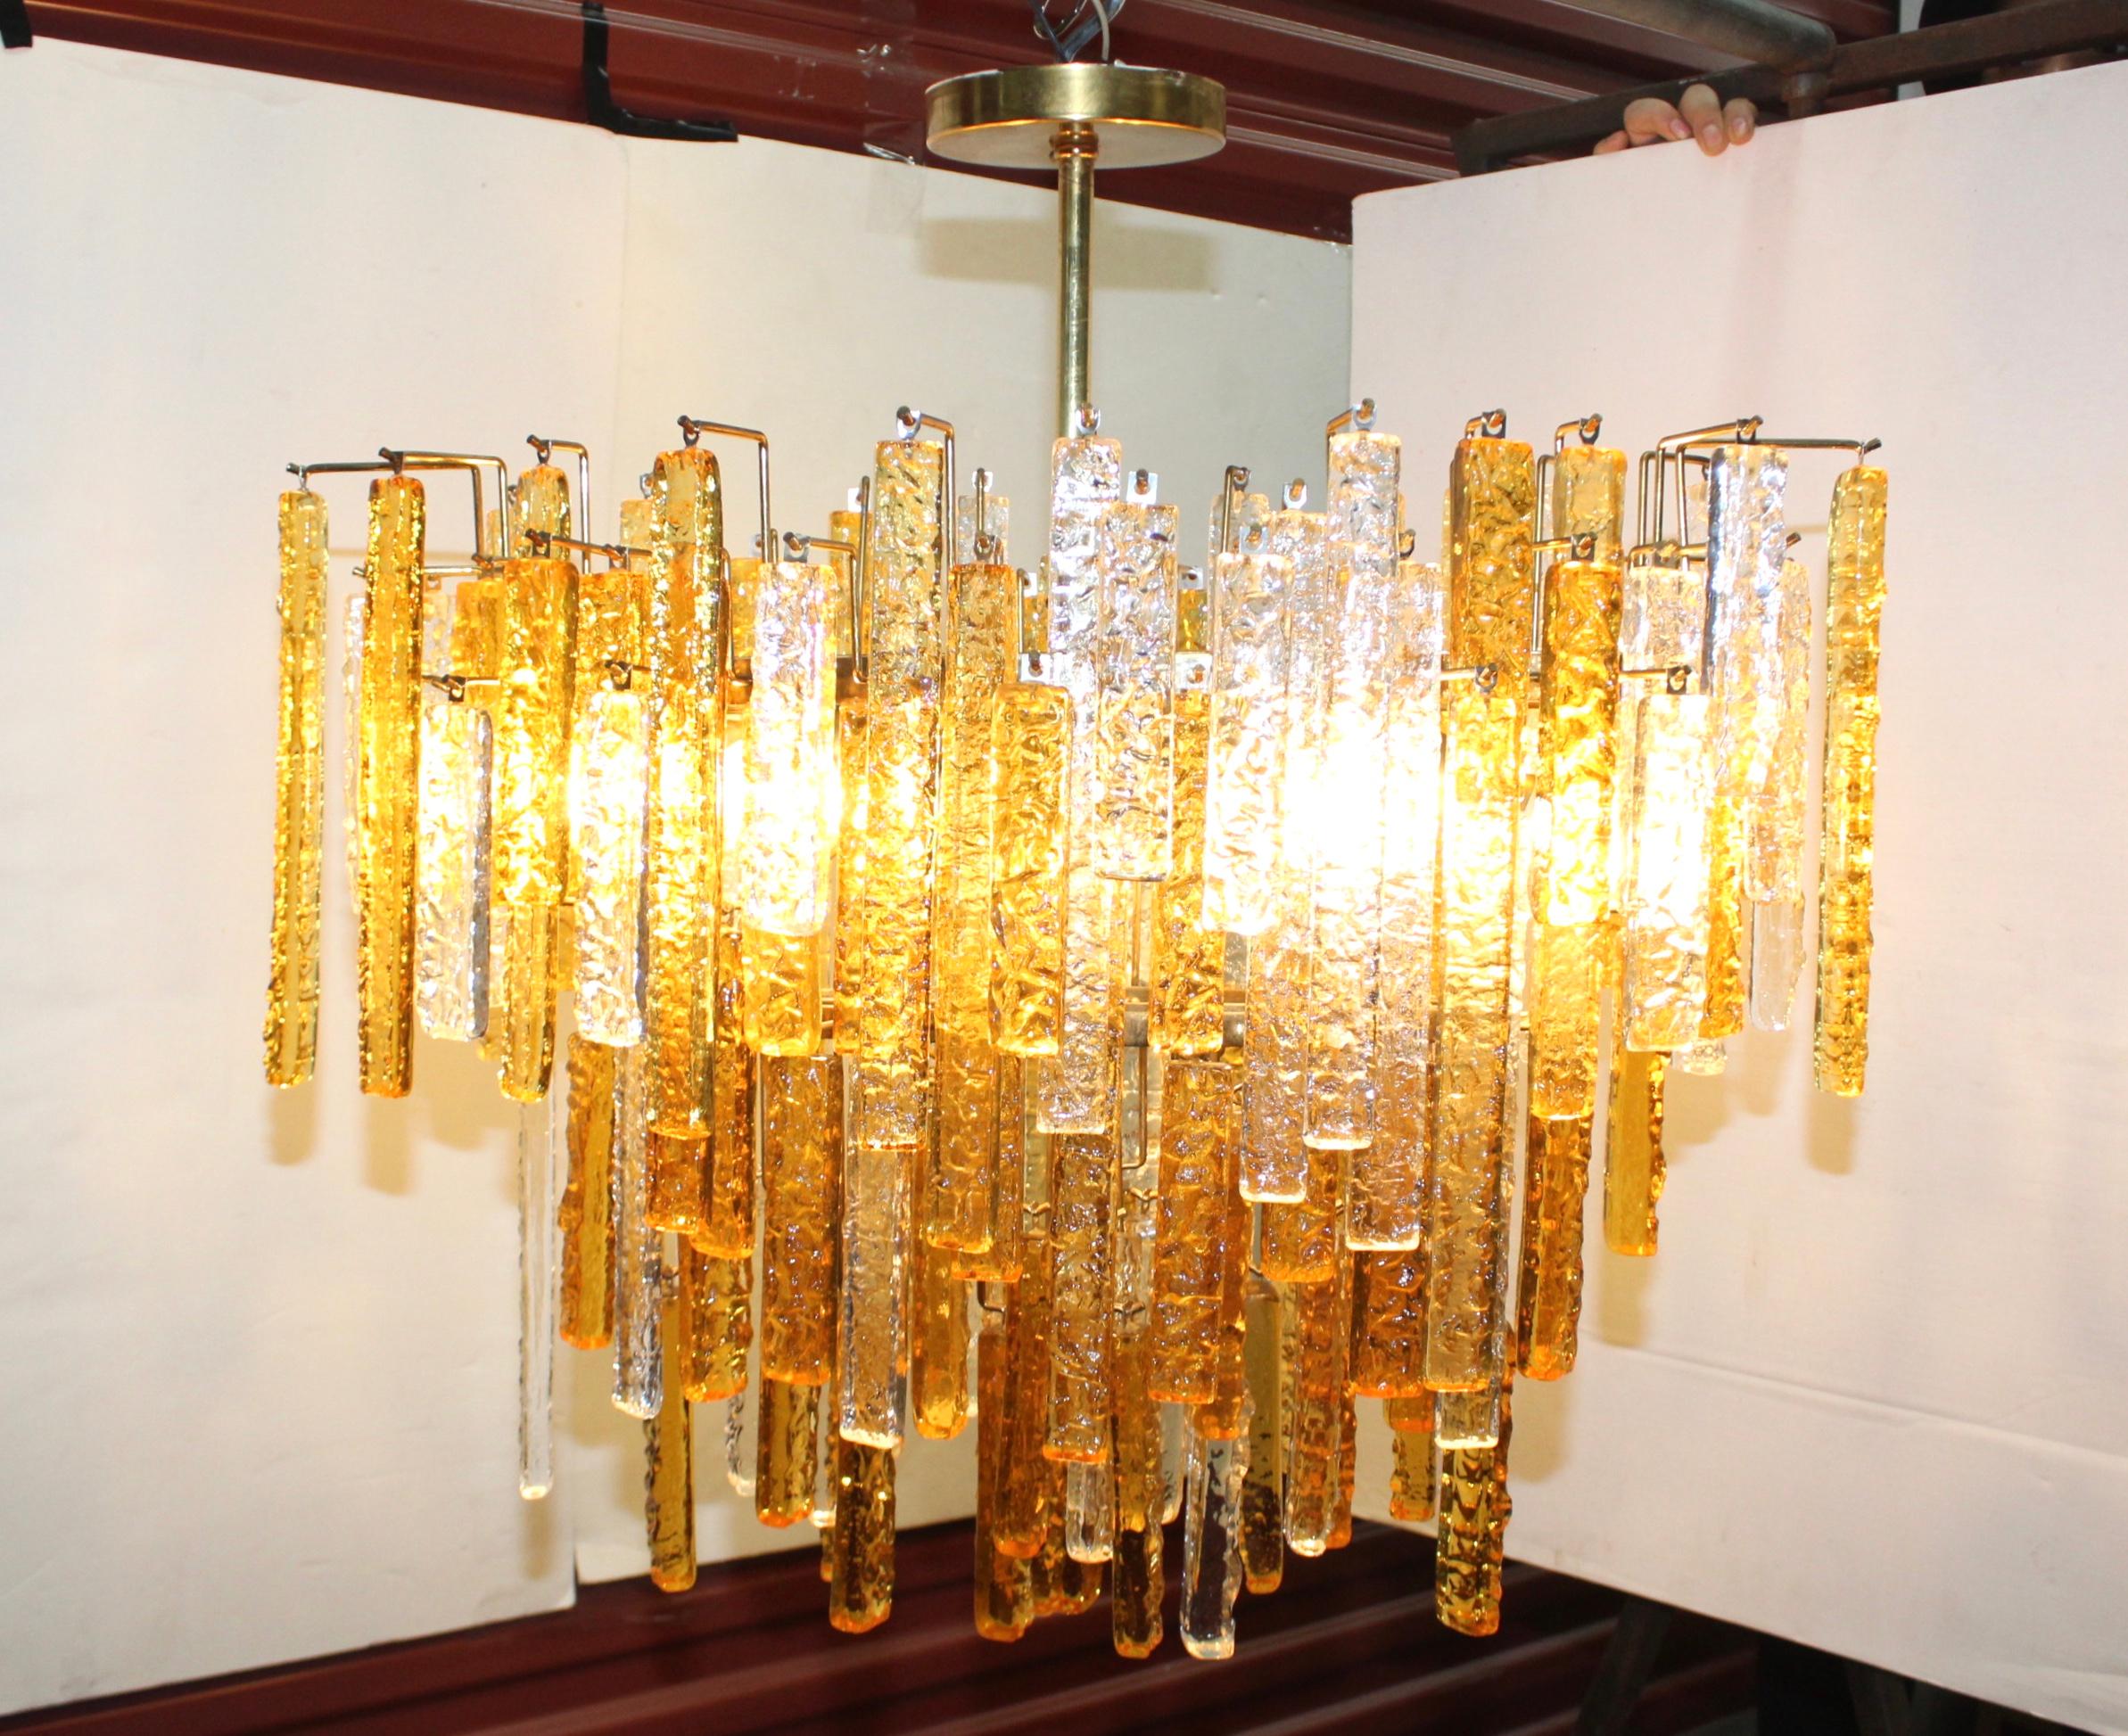 Stunning 1960s Mid-Century Modern Venini glass chandelier with brass frame and amber and clear glass rods.